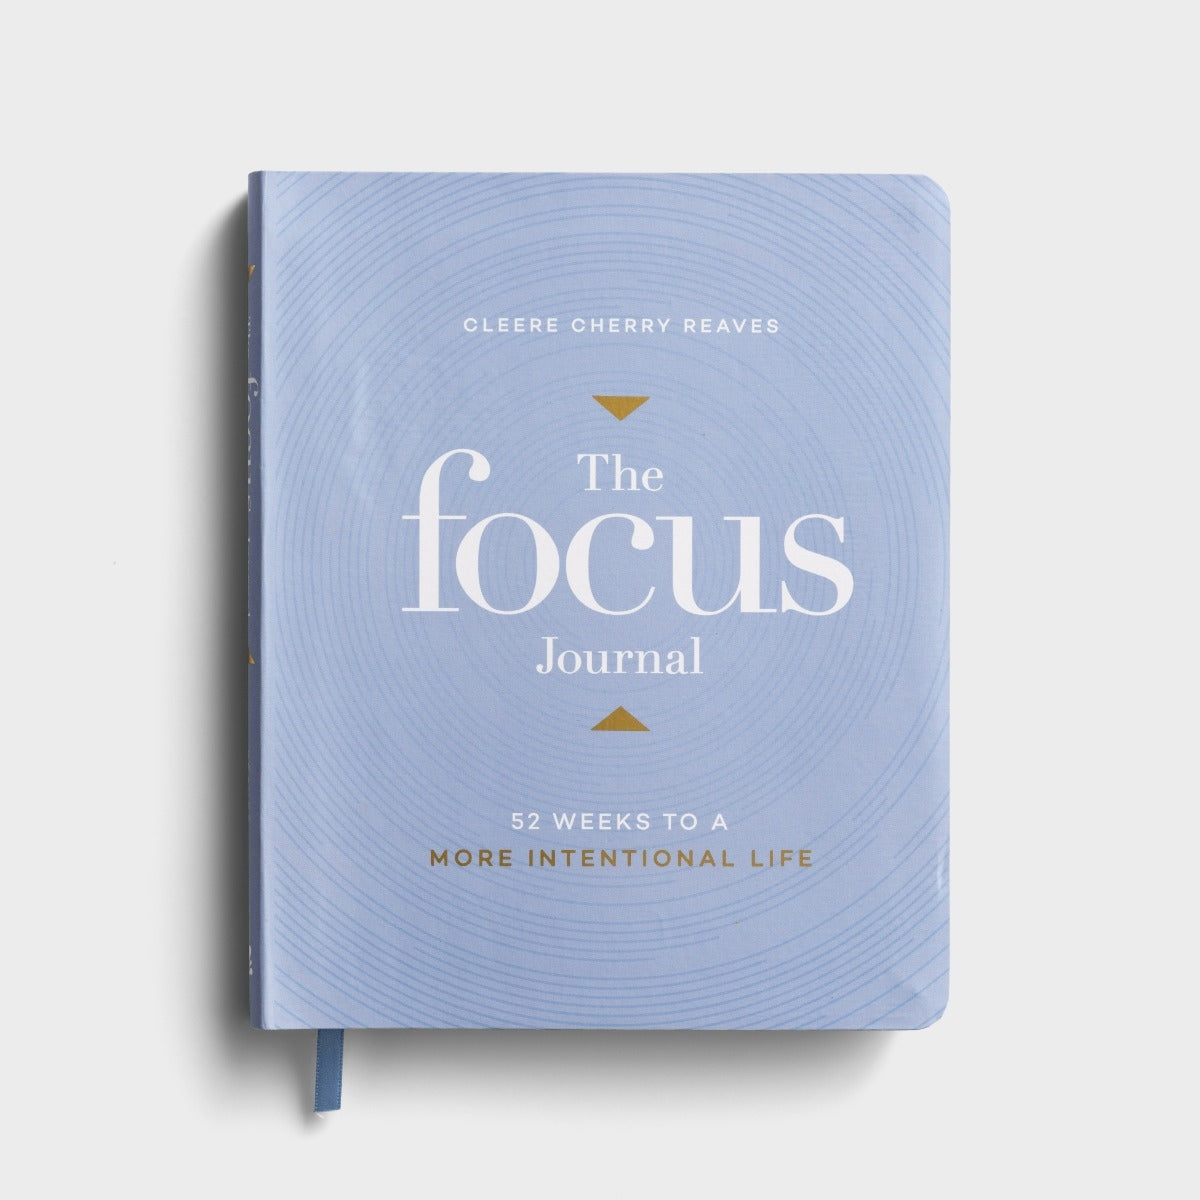 Cleere Cherry Reaves - The Focus Journal: 52 Weeks to a More Intentional Life